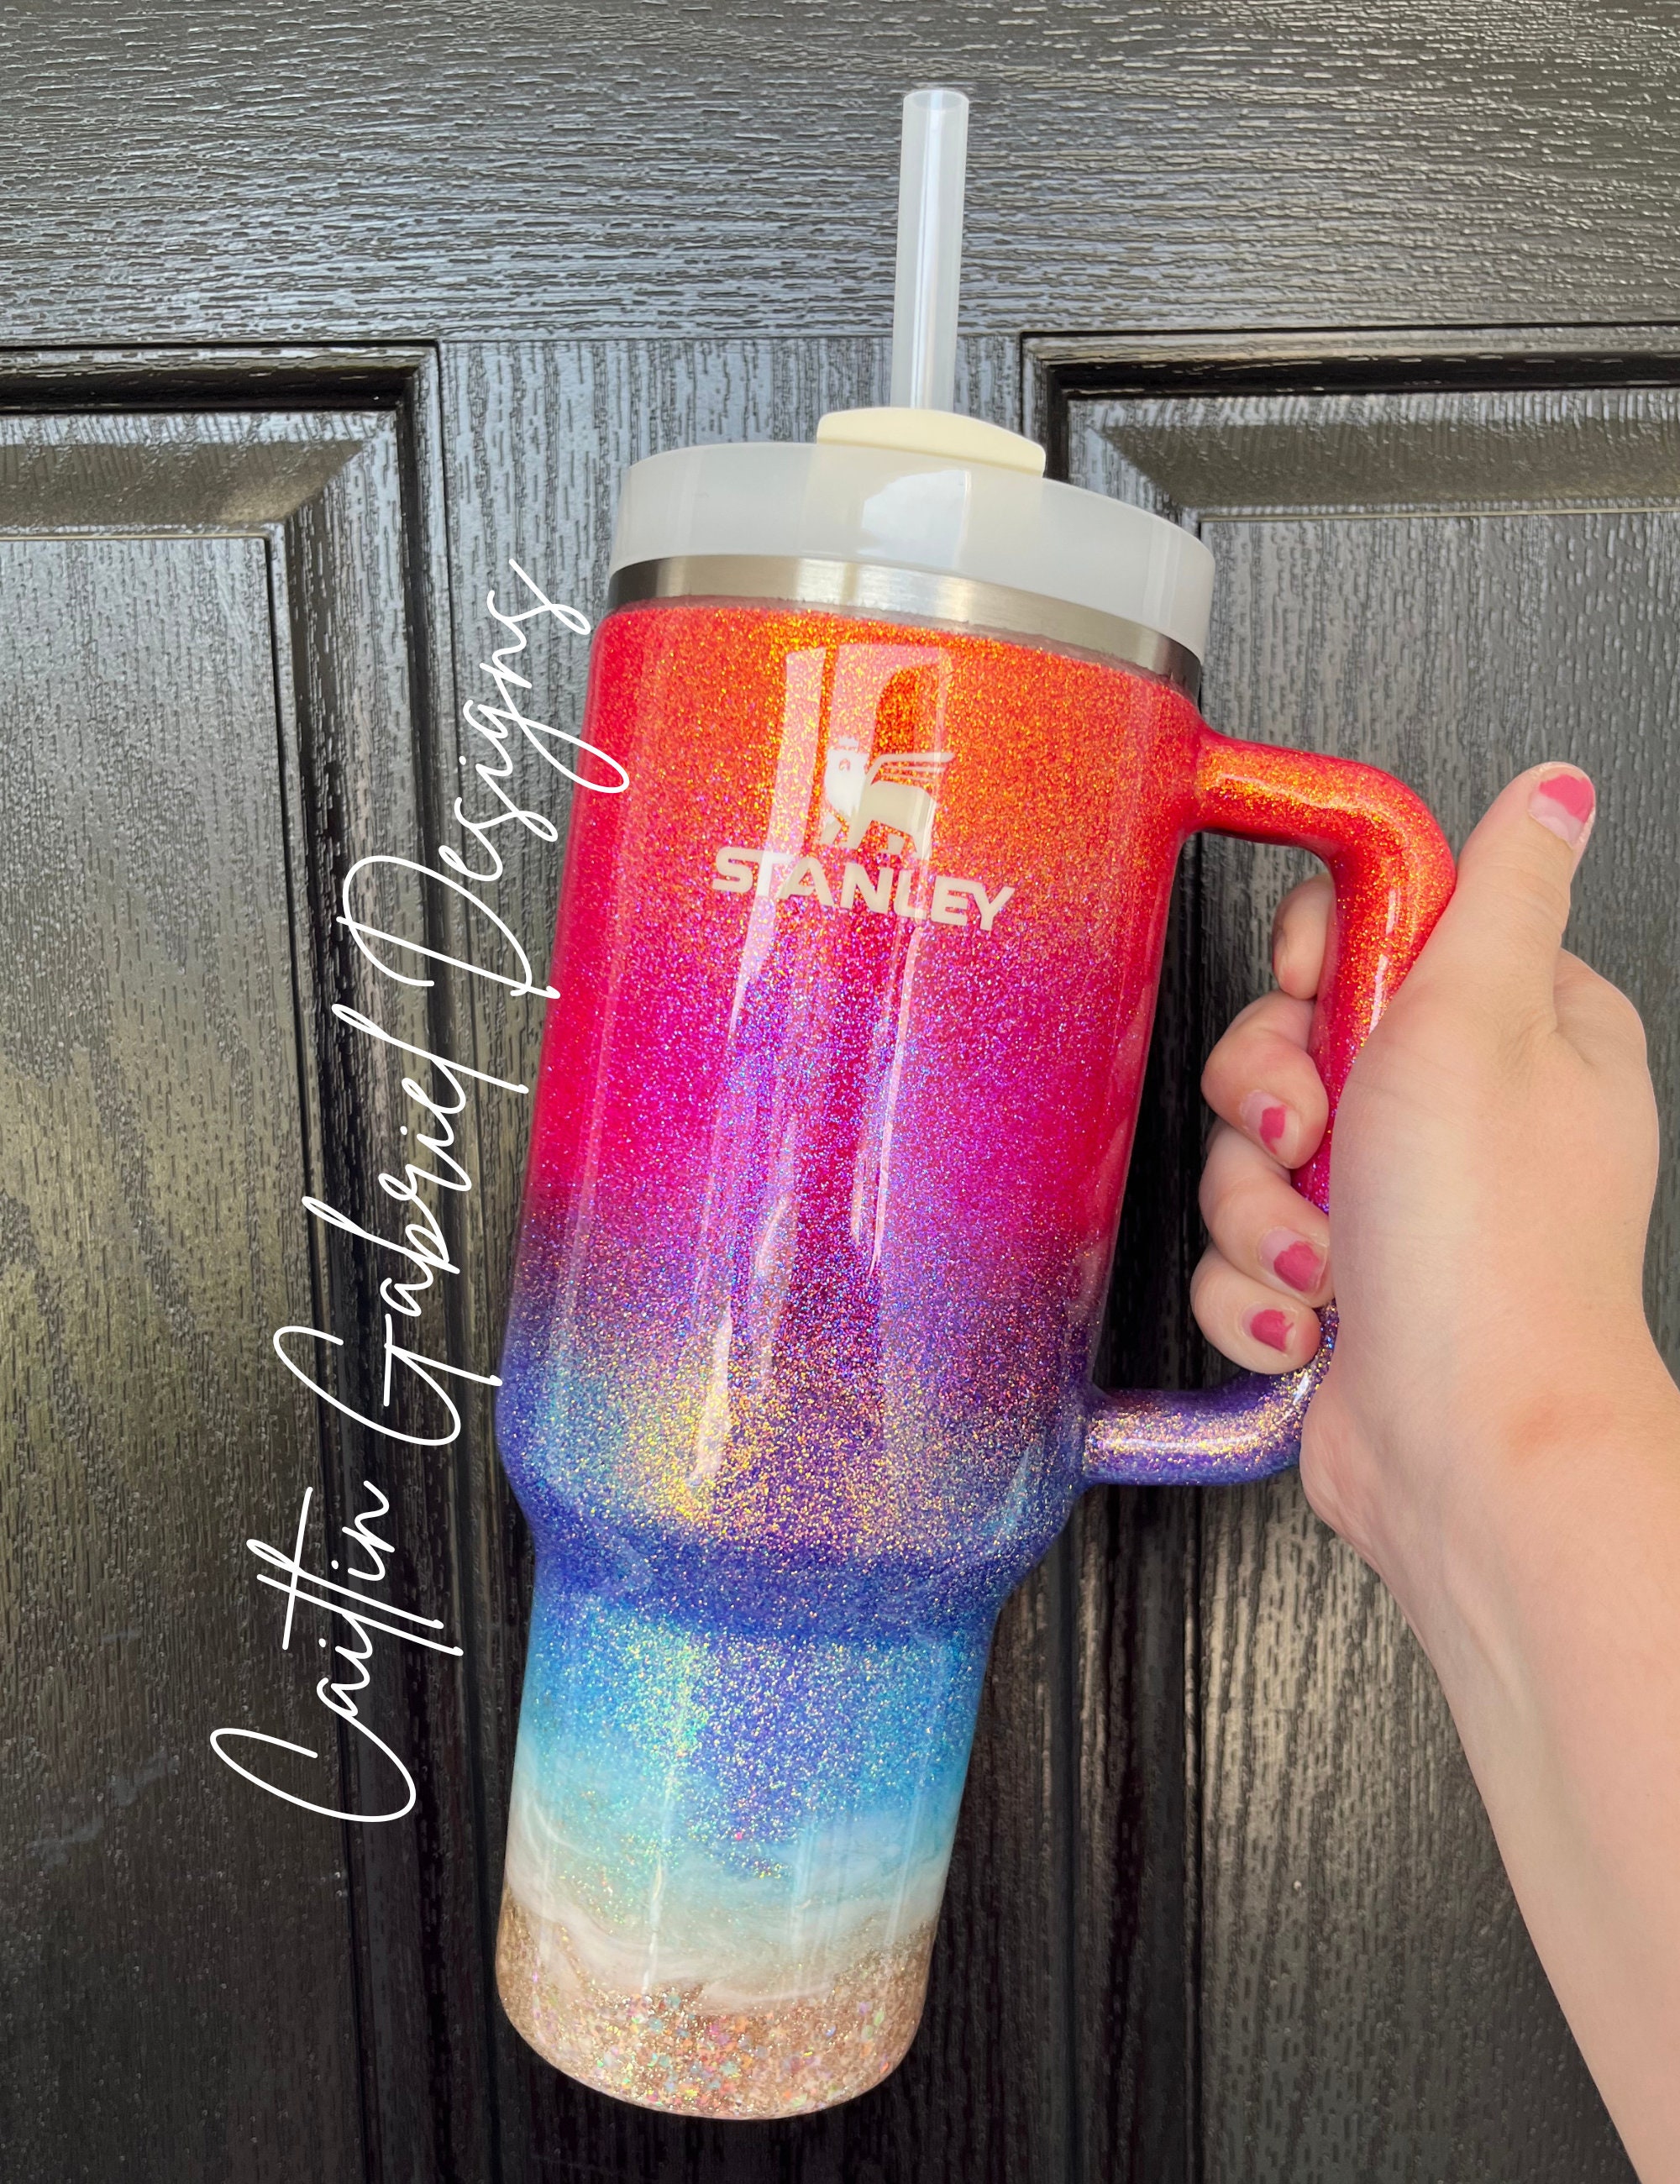 Stanley tumbler 40/30 oz Featuring a stunning gradient ombre